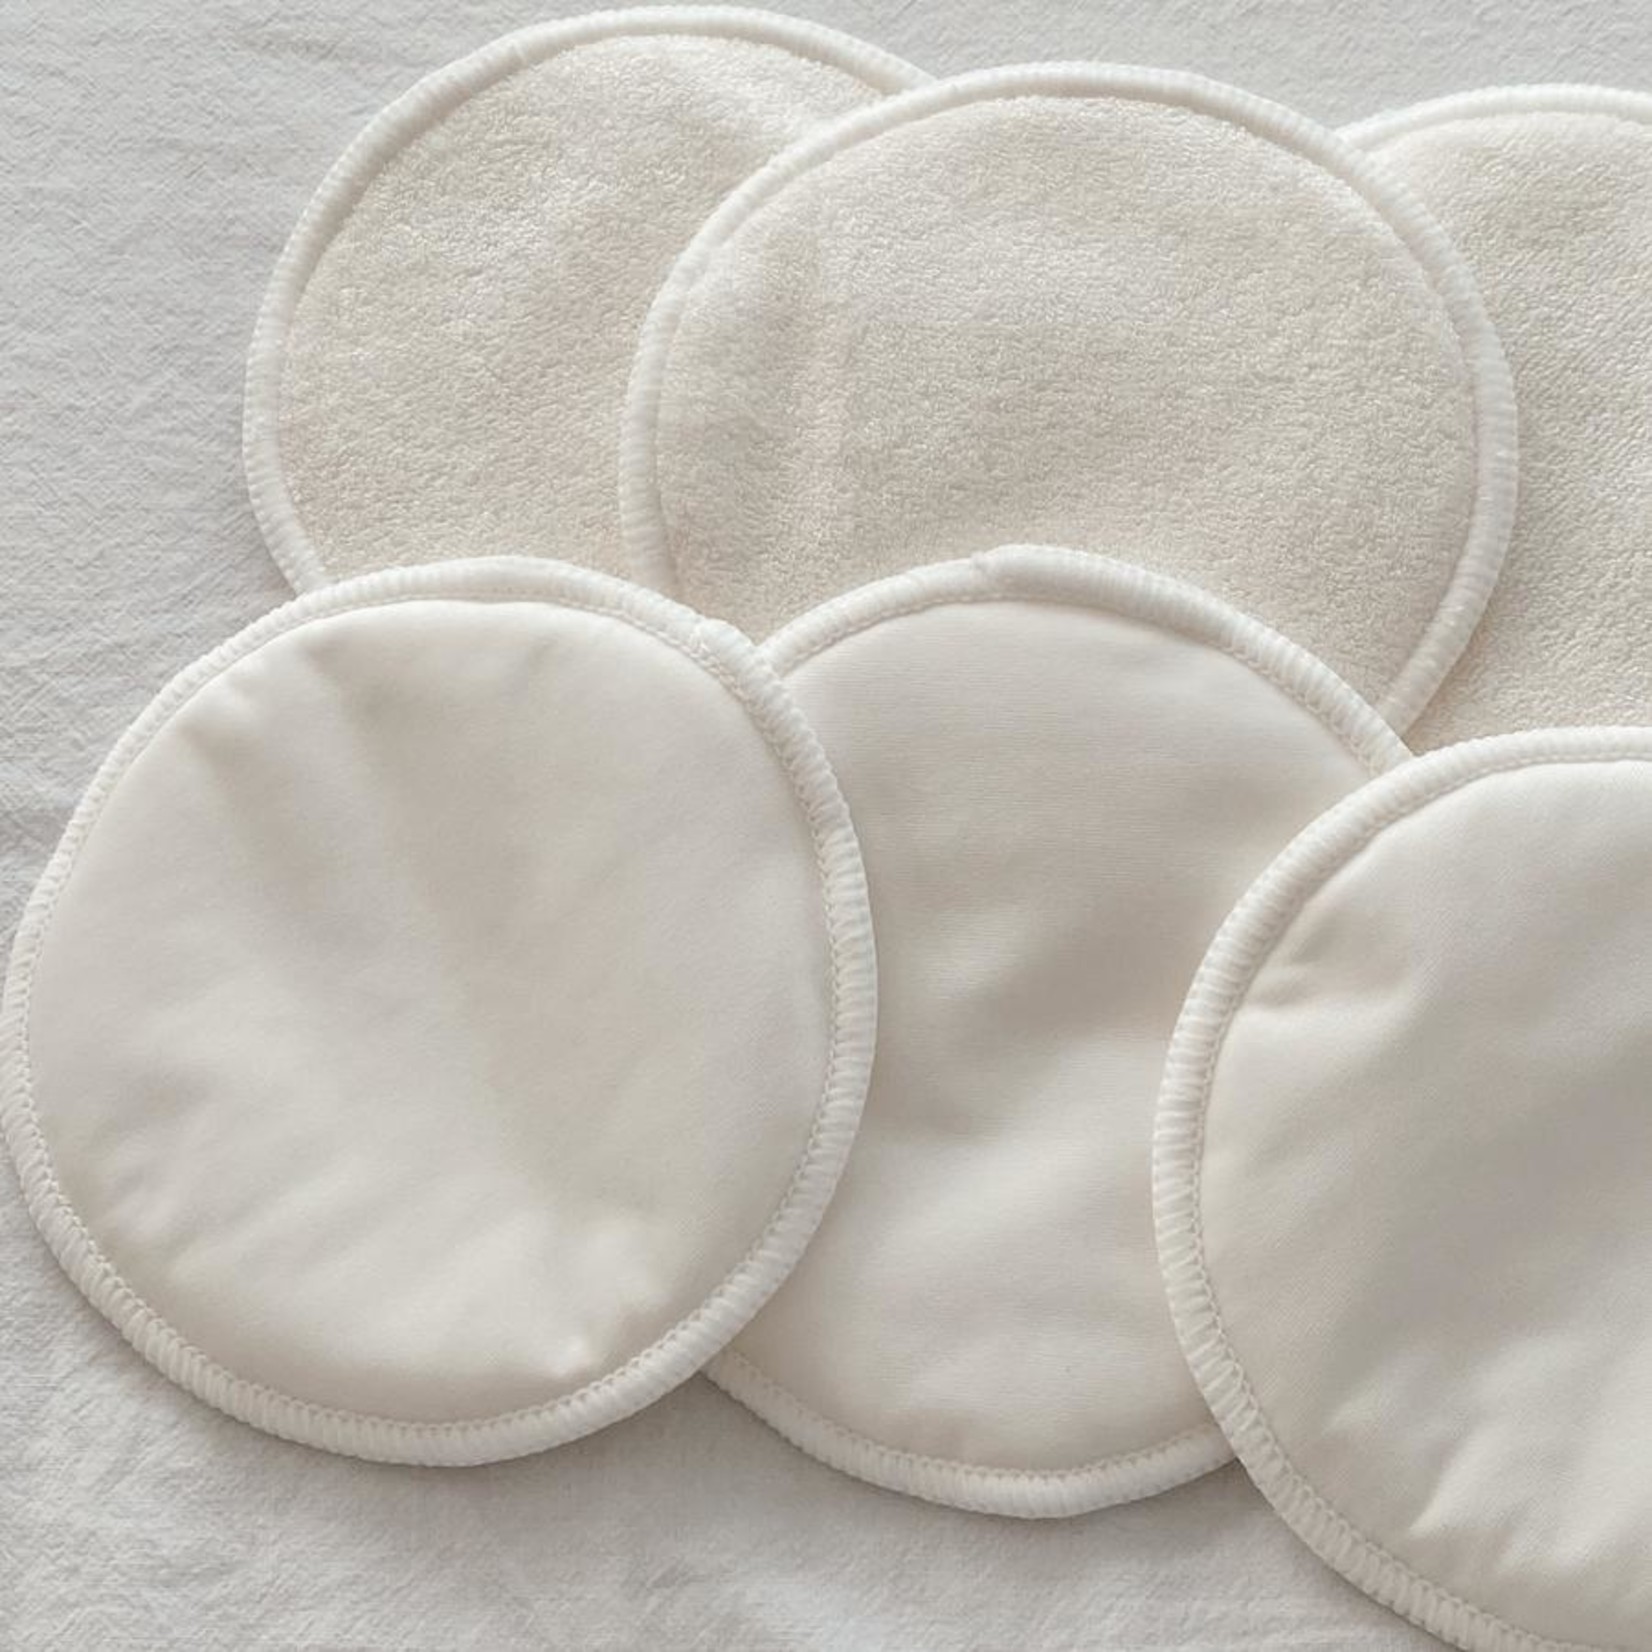 Luvme Luvme Bamboo Eco Reusable Breast Pads